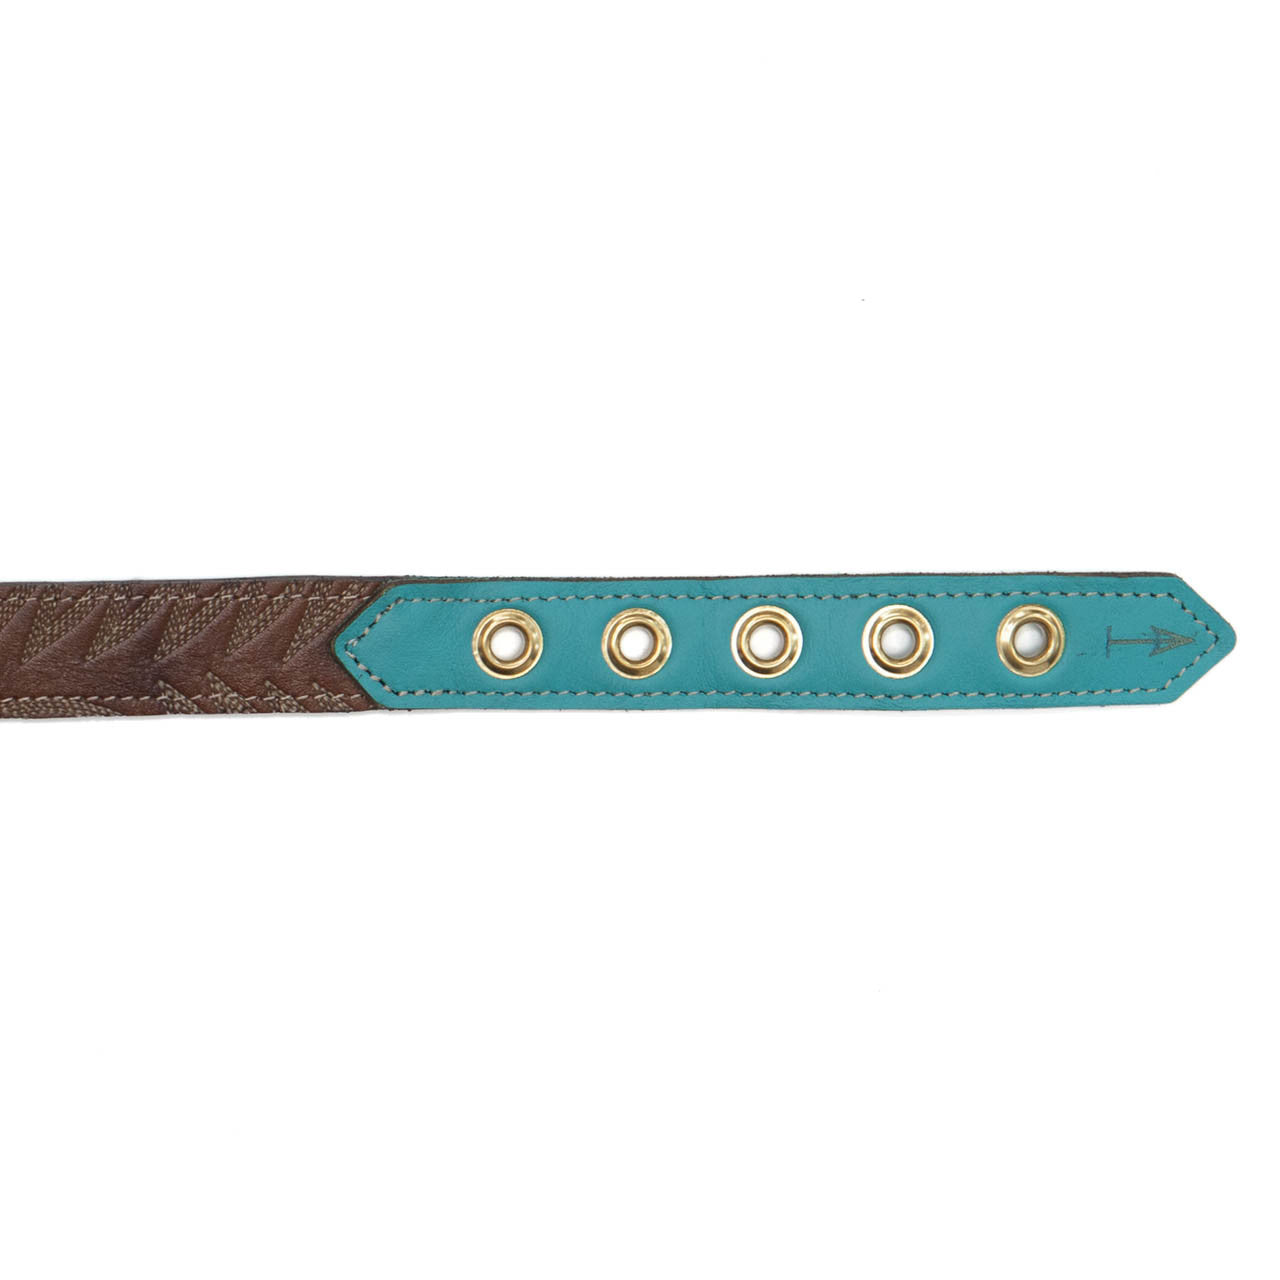 Turquoise Dog Collar with Dark Brown Leather + White Stitching (clasp)